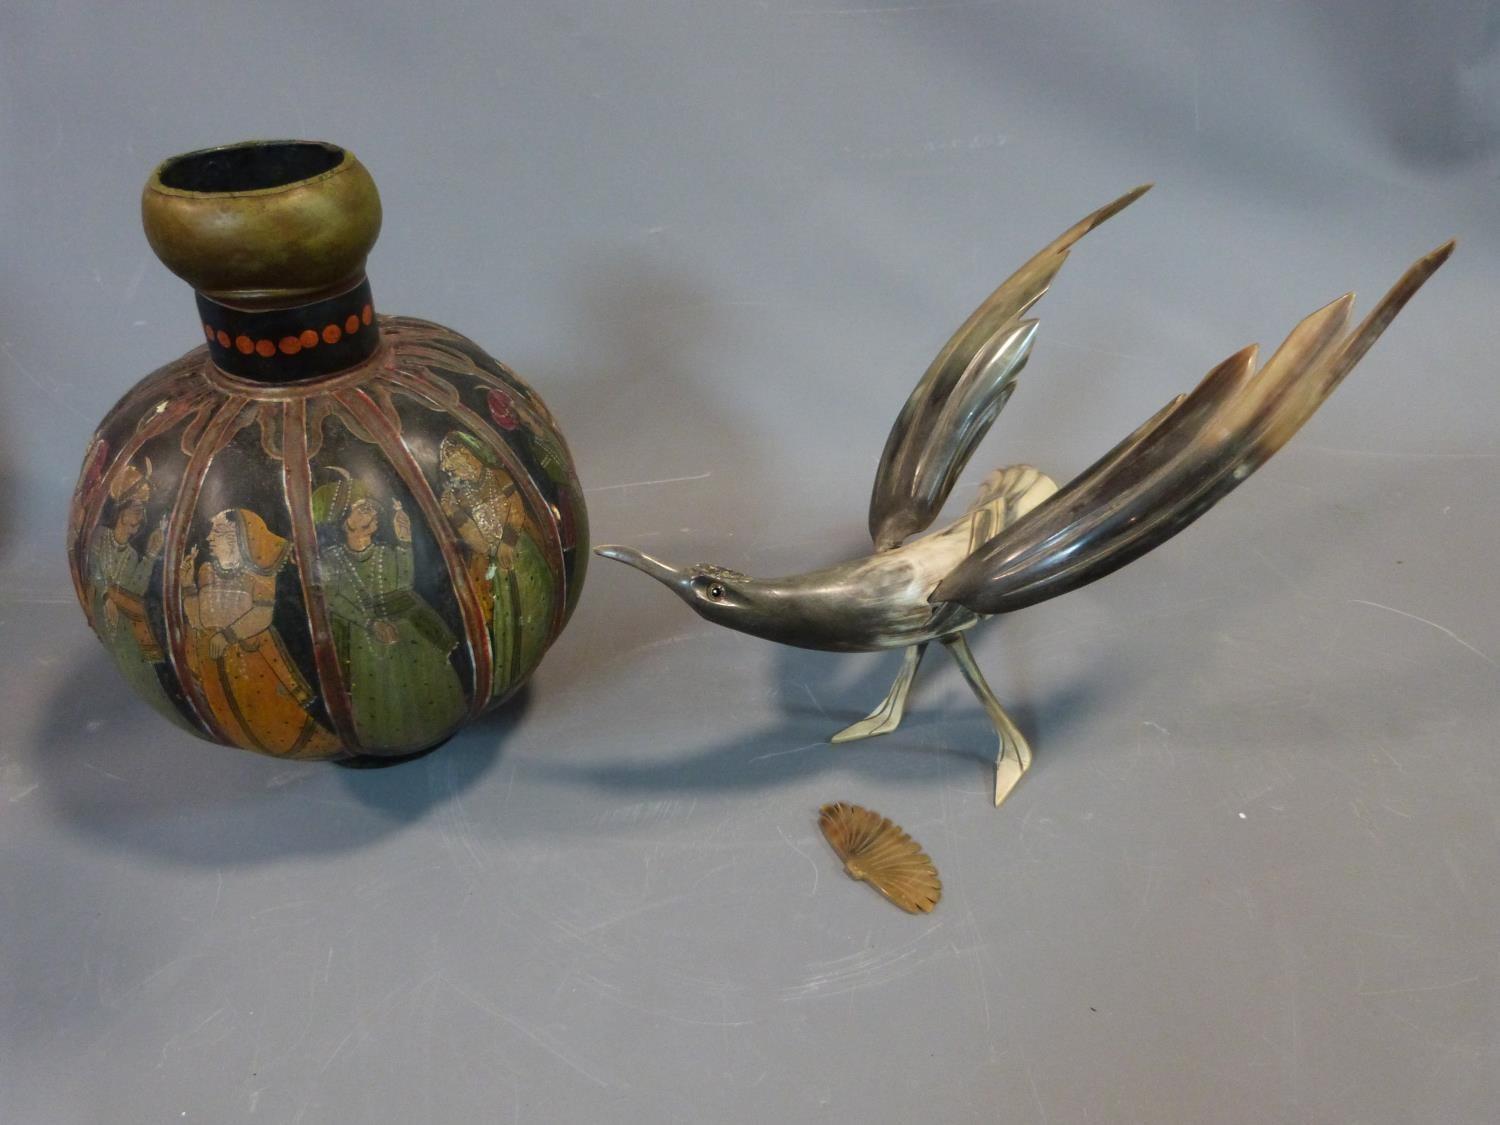 A painted Indian vase and carved horn bird. Horn Bird stamped Depose, made in France. Vase painted